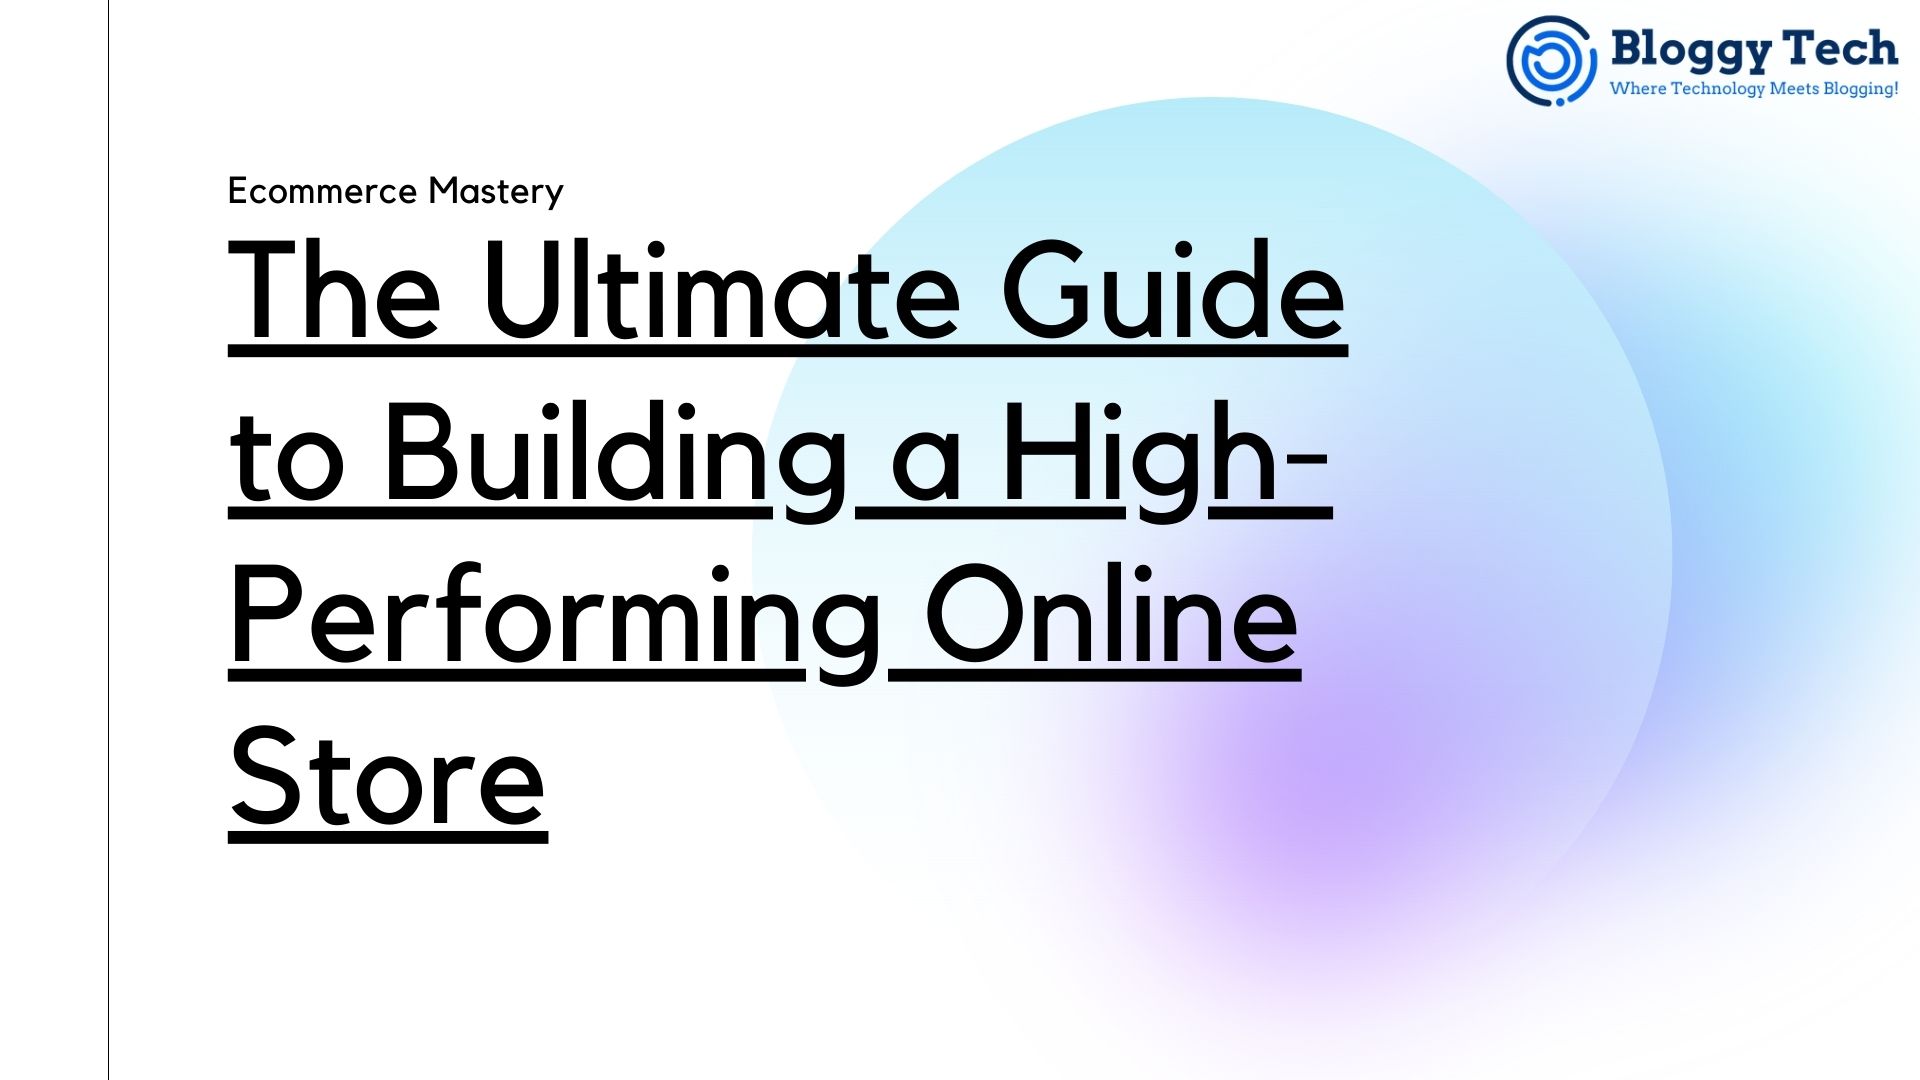 Ecommerce Mastery: The Ultimate Guide to Building a High-Performing Online Store